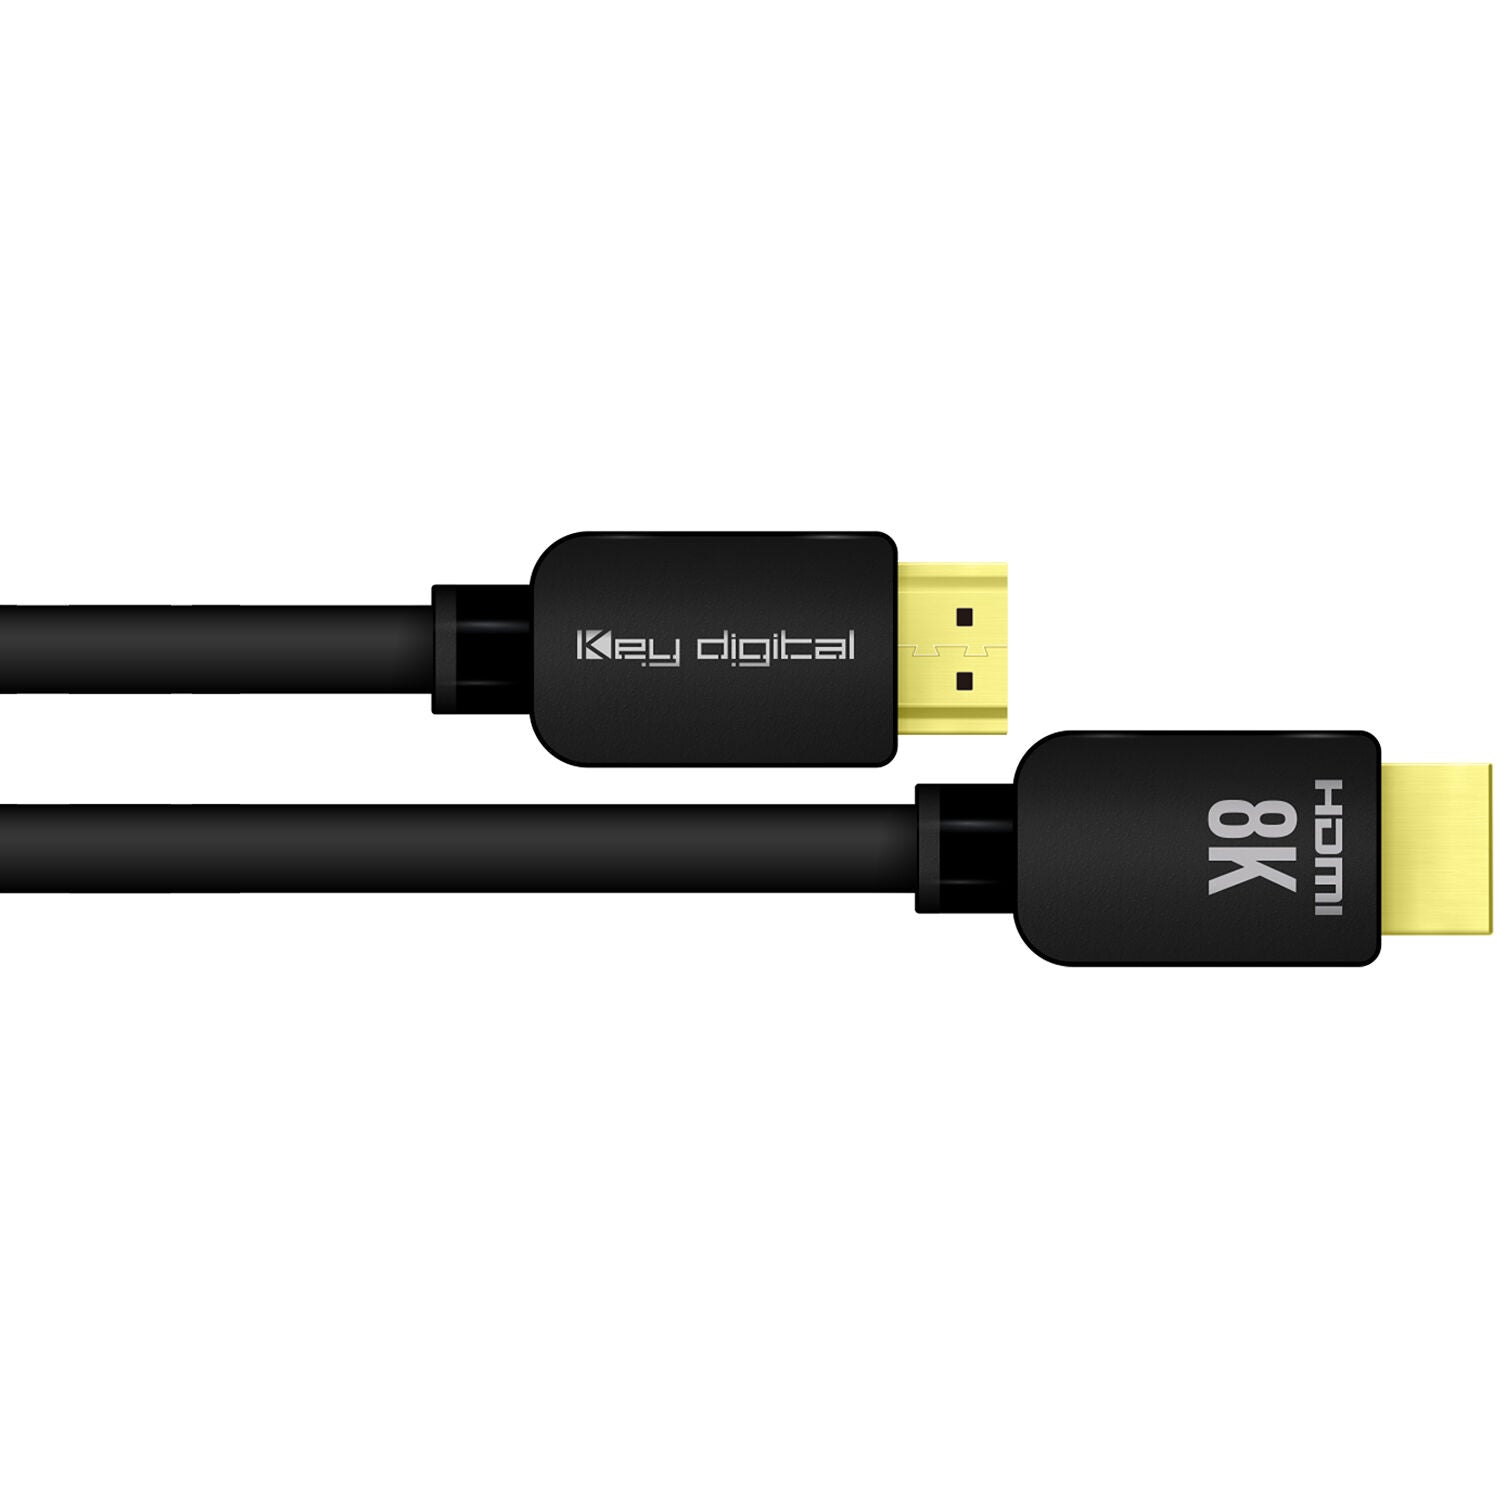 Key Digital 8K/48G HDMI Cable with HDCP2.3, eARC, 30 AWG - 10ft/3m